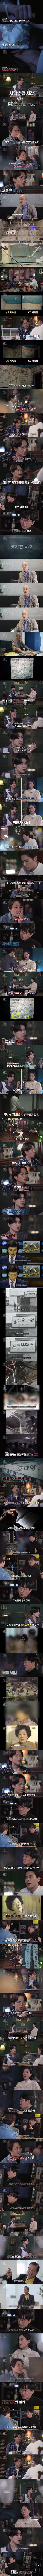 1987 Daejeon... ...32 bodies found on the ceiling...jpg